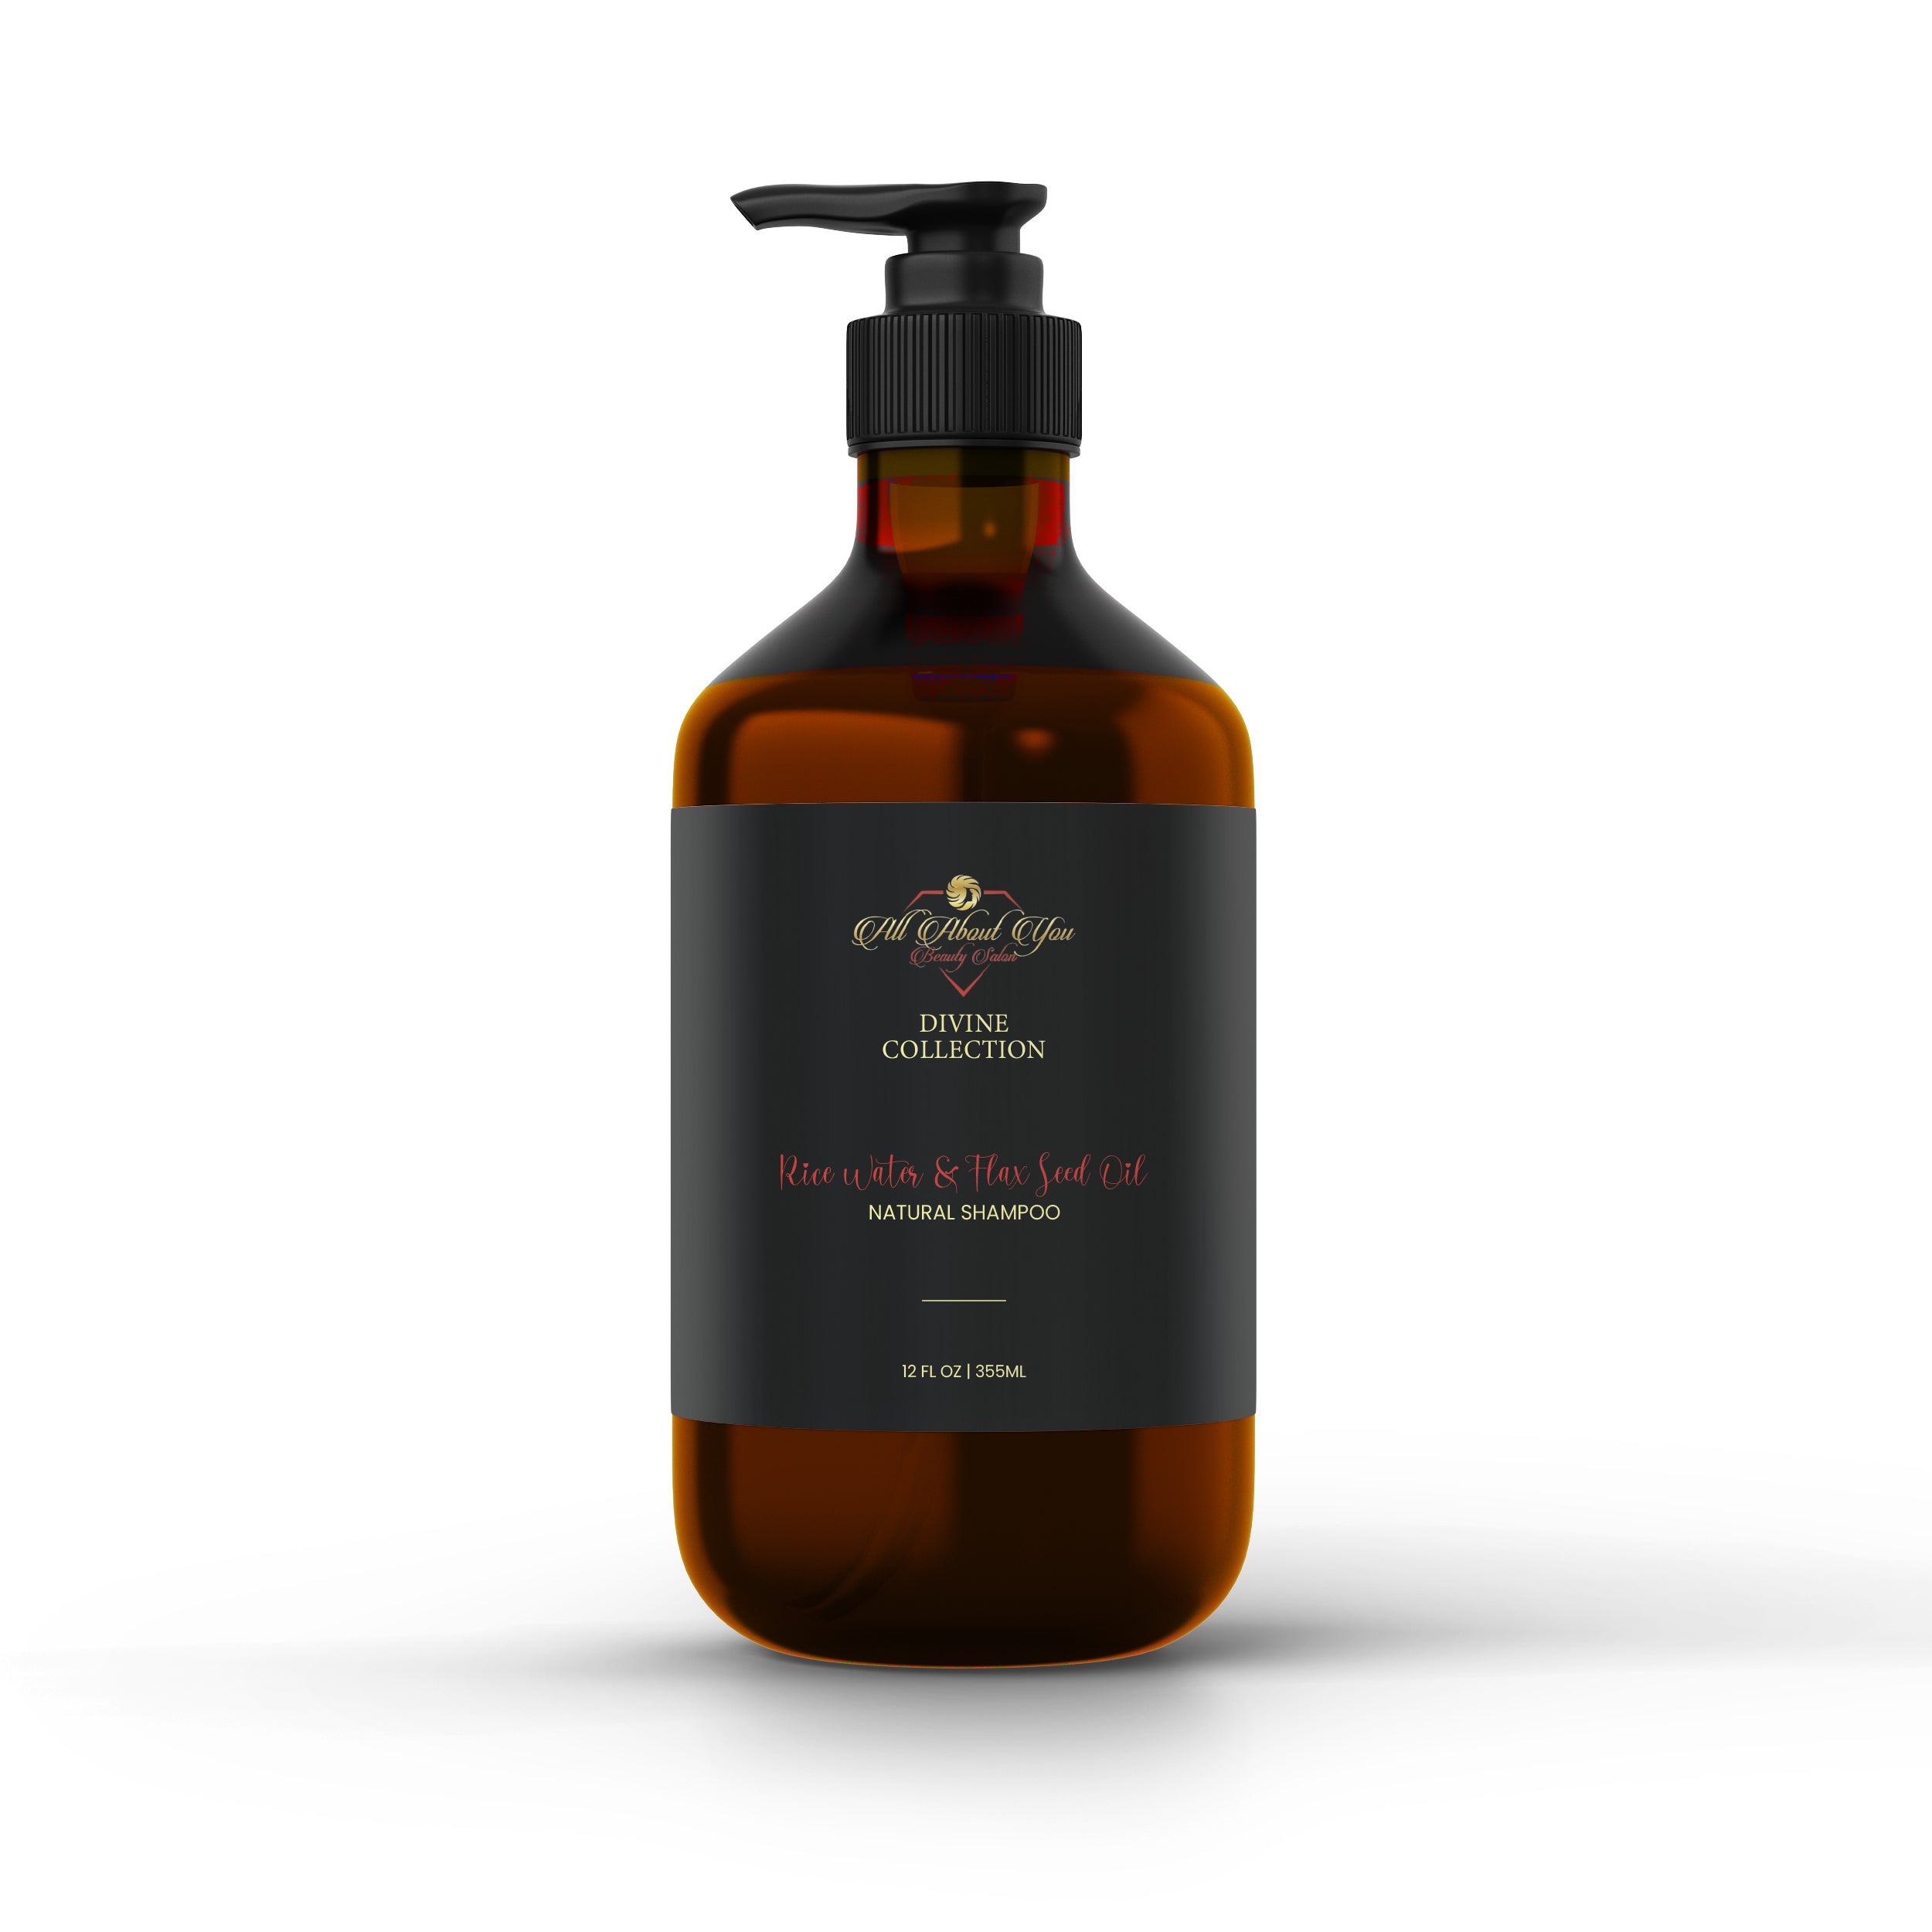 overraskelse overraskelse Lover og forskrifter Aay Beauty - Divine Beauty | Rice Water & Flax Seed Oil Natural Shampoo: 12  Oz – All About You Beauty Salon